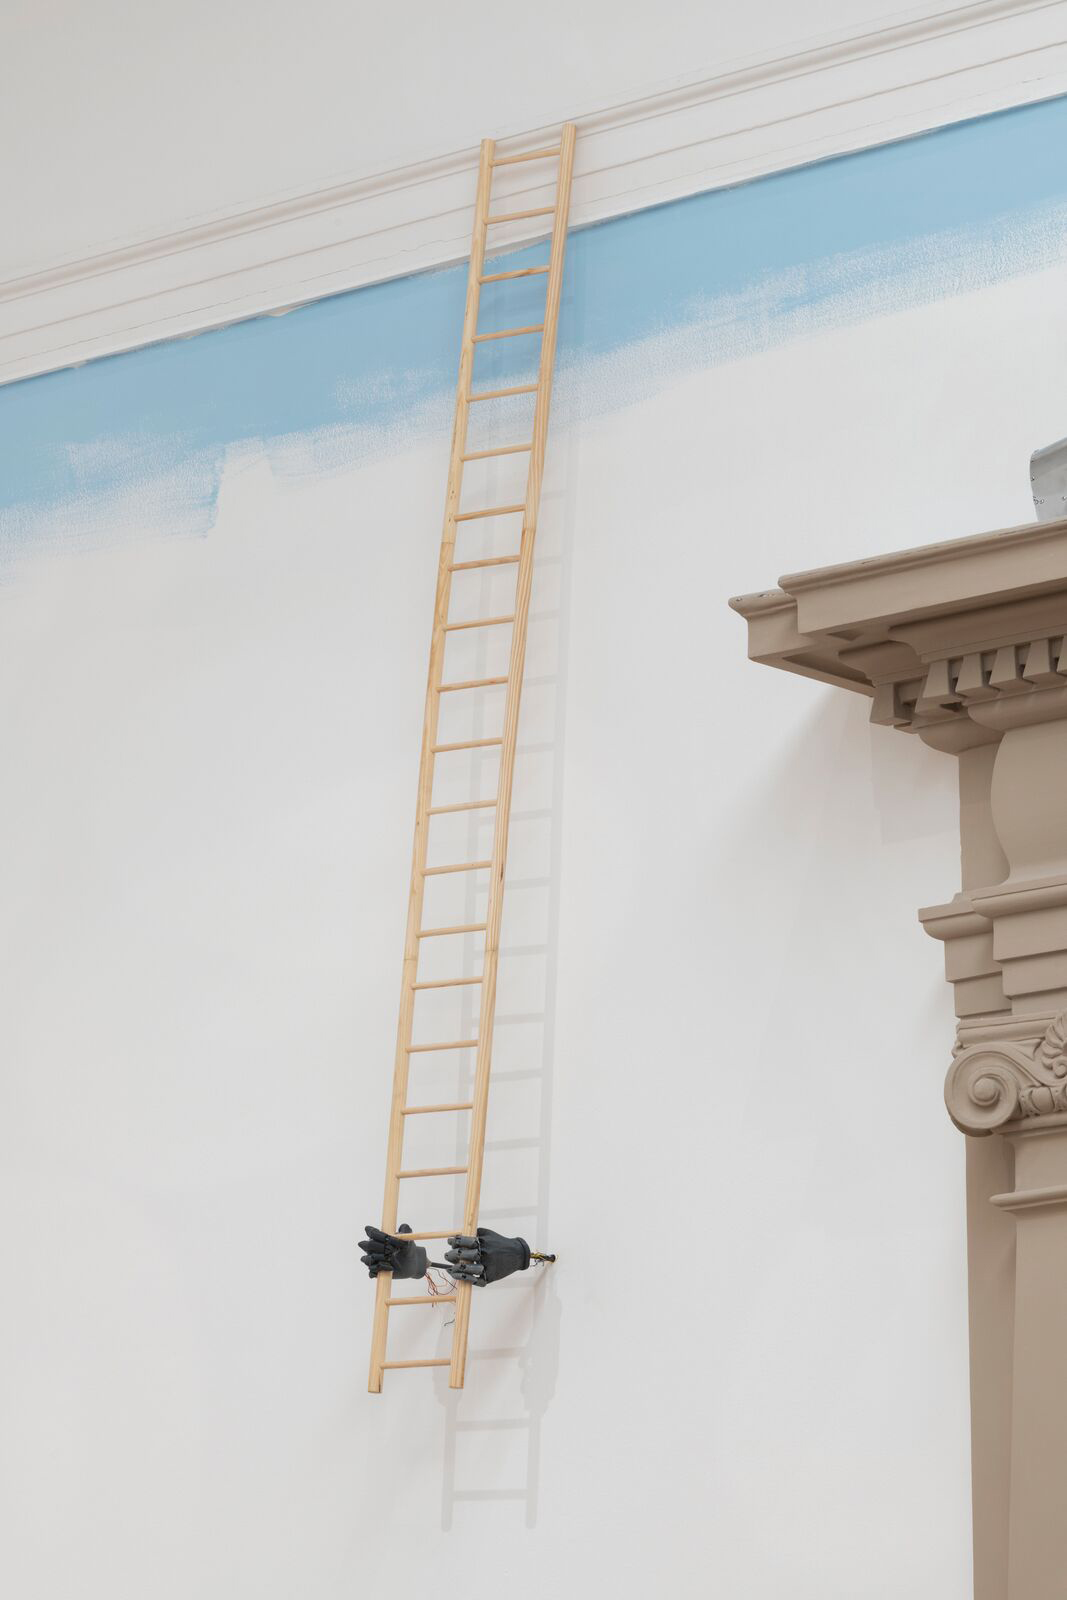 a ladder that enters through the ceiling and has two black hands holding it at the bottom